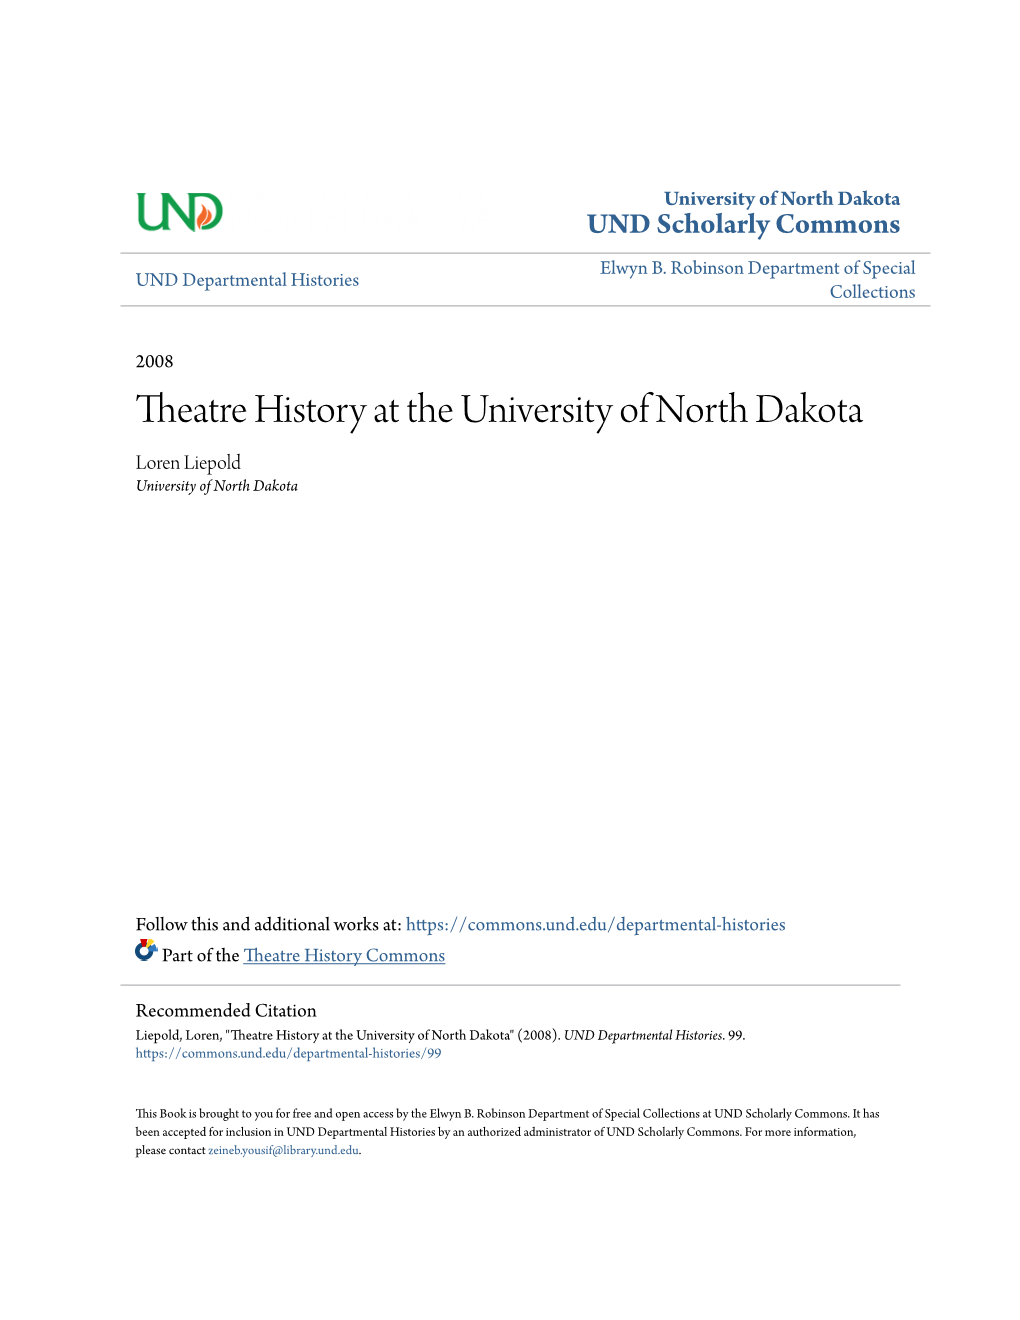 Theatre History at the University of North Dakota Loren Liepold University of North Dakota